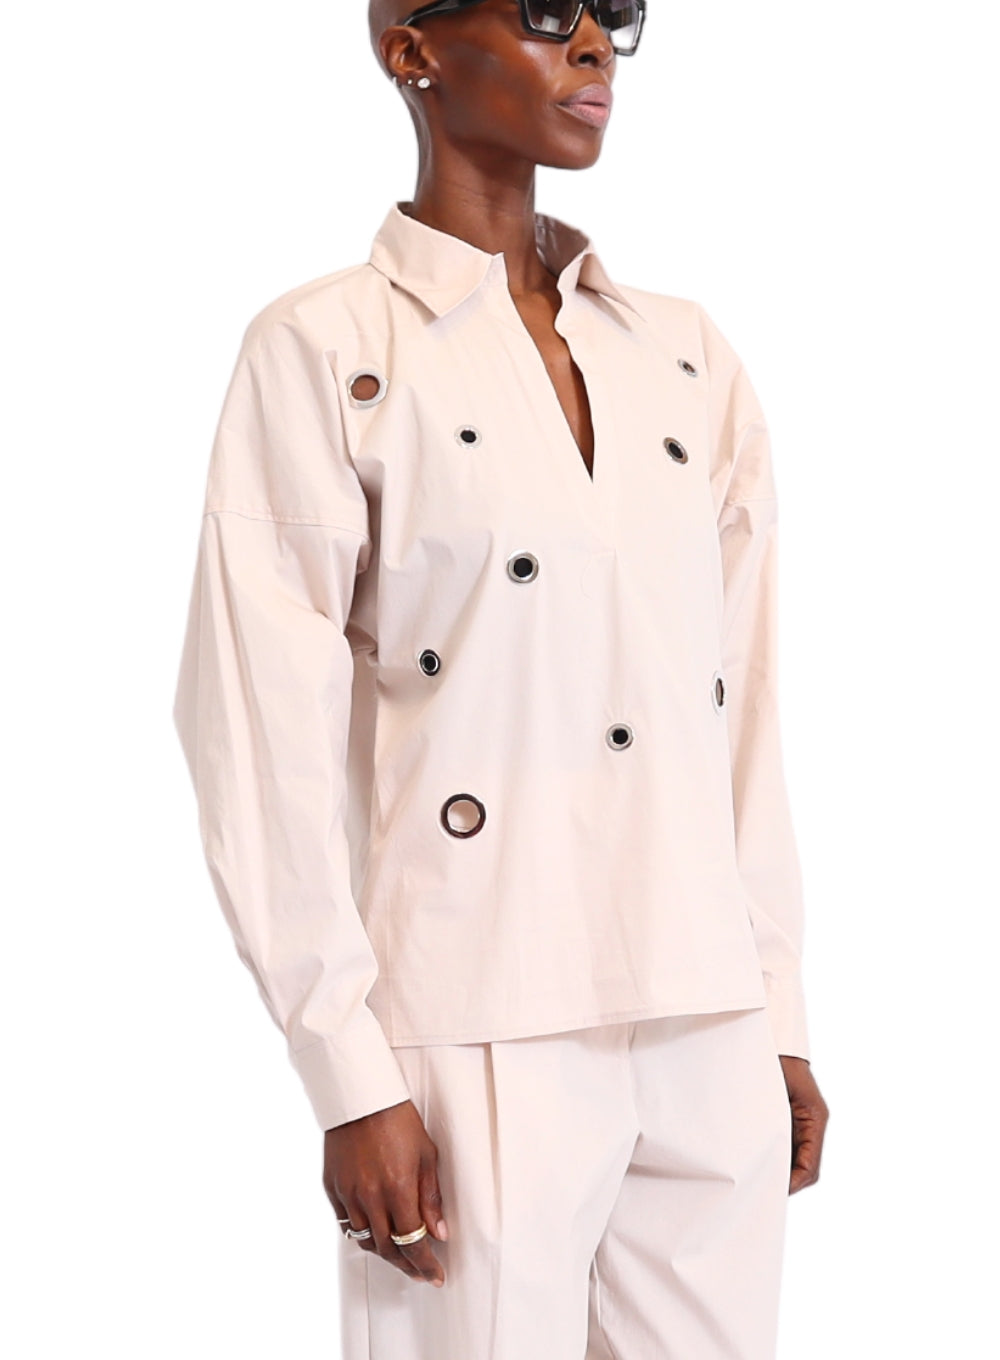 LIVIANA CONTI | Collared Shirt With Grommets